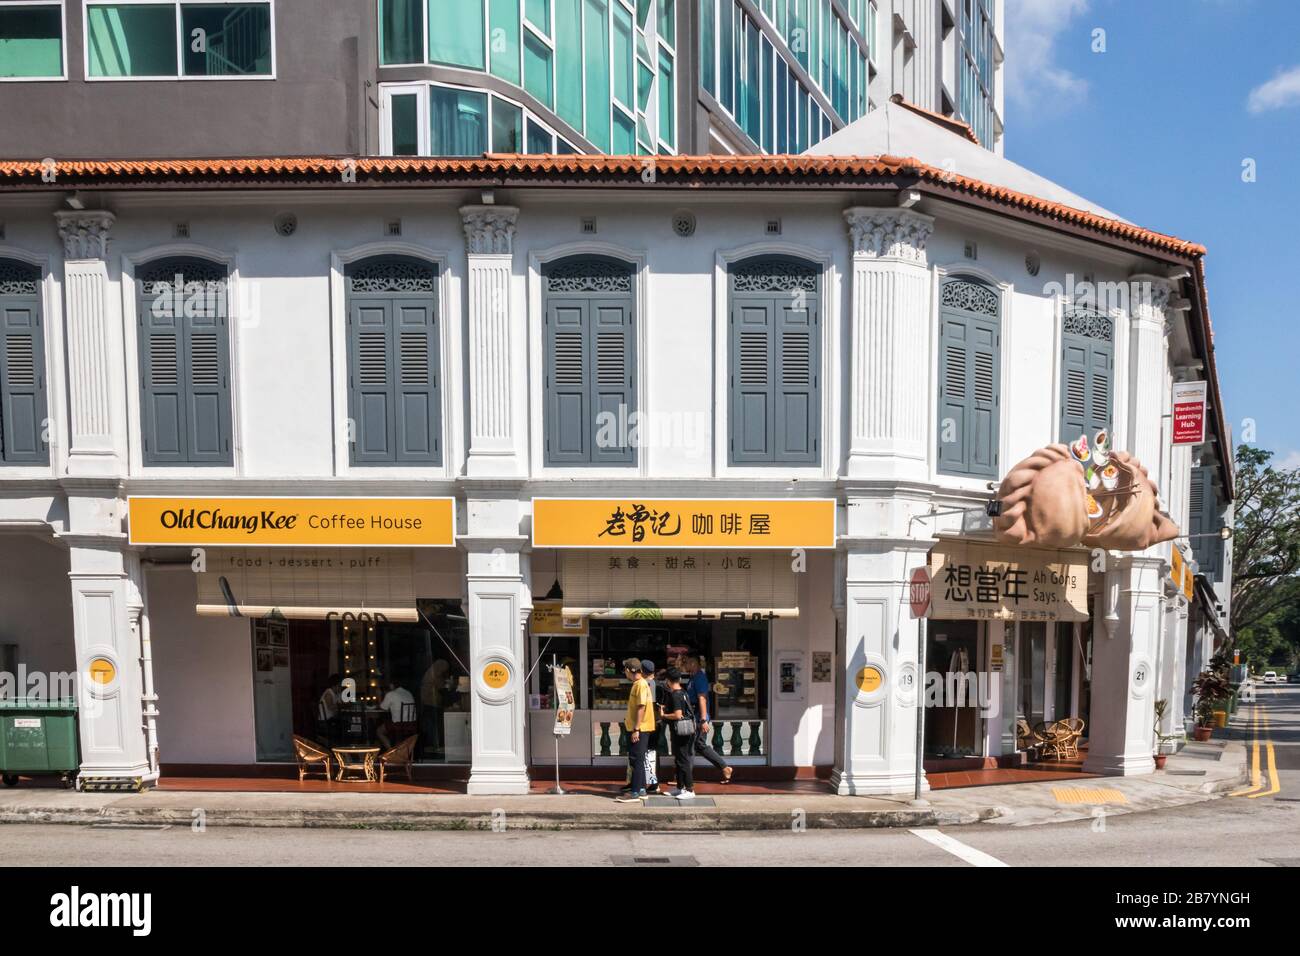 Singapore - July 6th 2019: Old Chang Kee outlet in shophouse. It ...